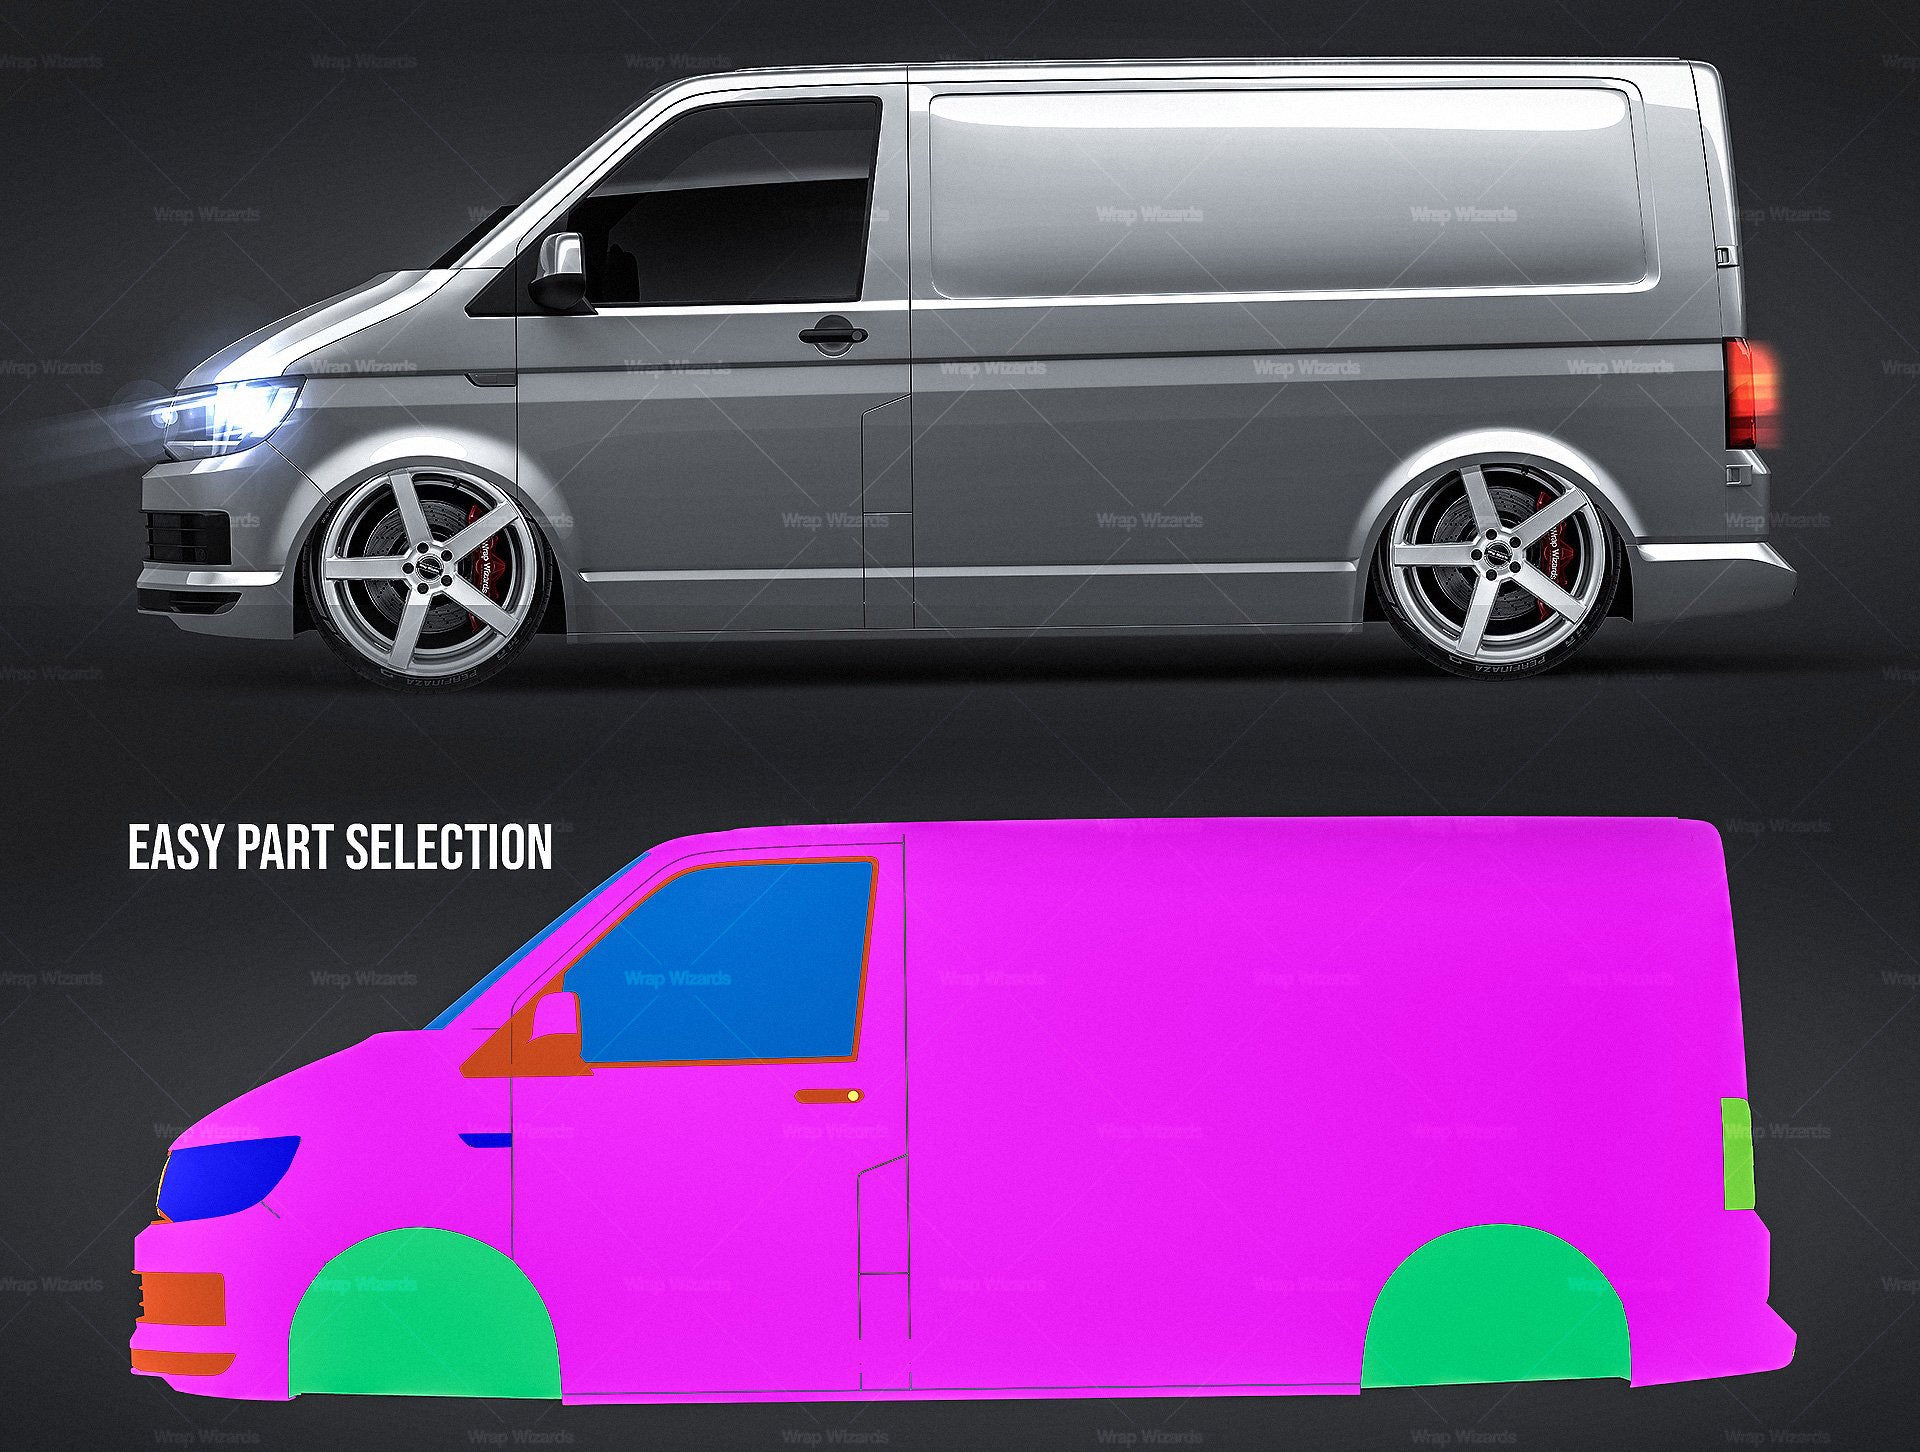 Volkswagen Transporter T6 2016 glossy finish - all sides Car Mockup Template.psd